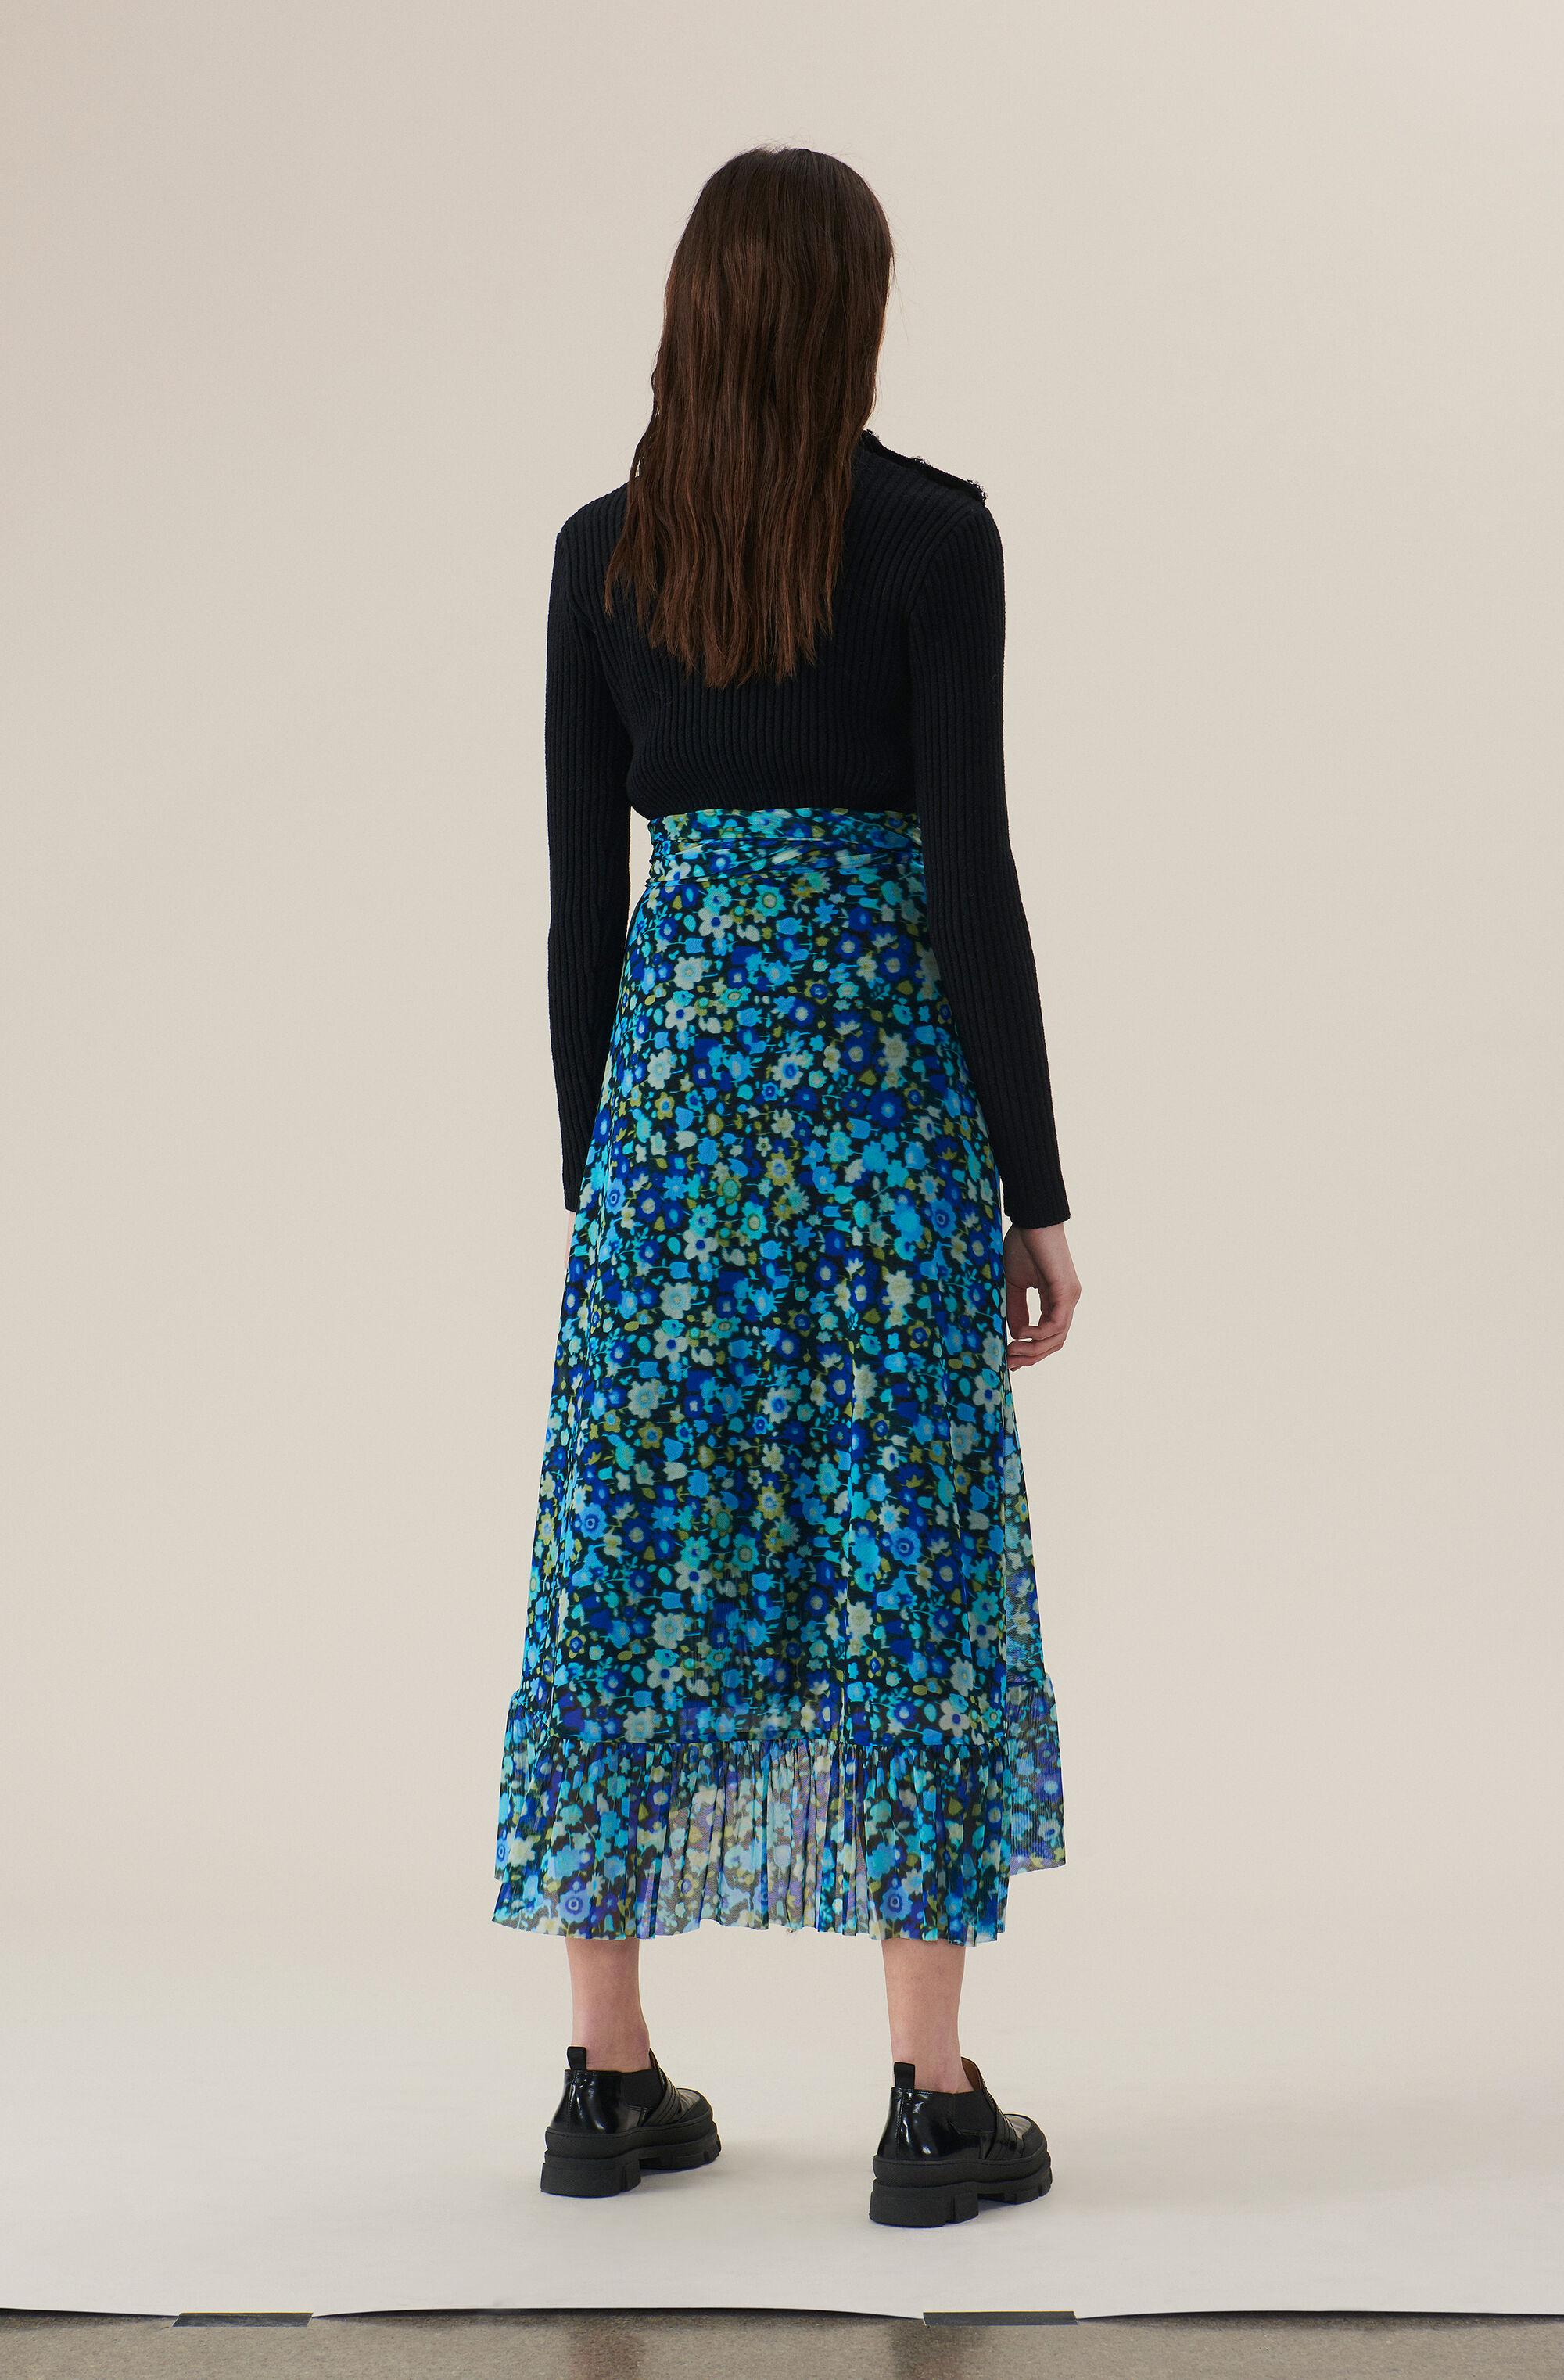 Ganni Synthetic Printed Mesh Wrap Skirt in Azure Blue (Blue) - Lyst